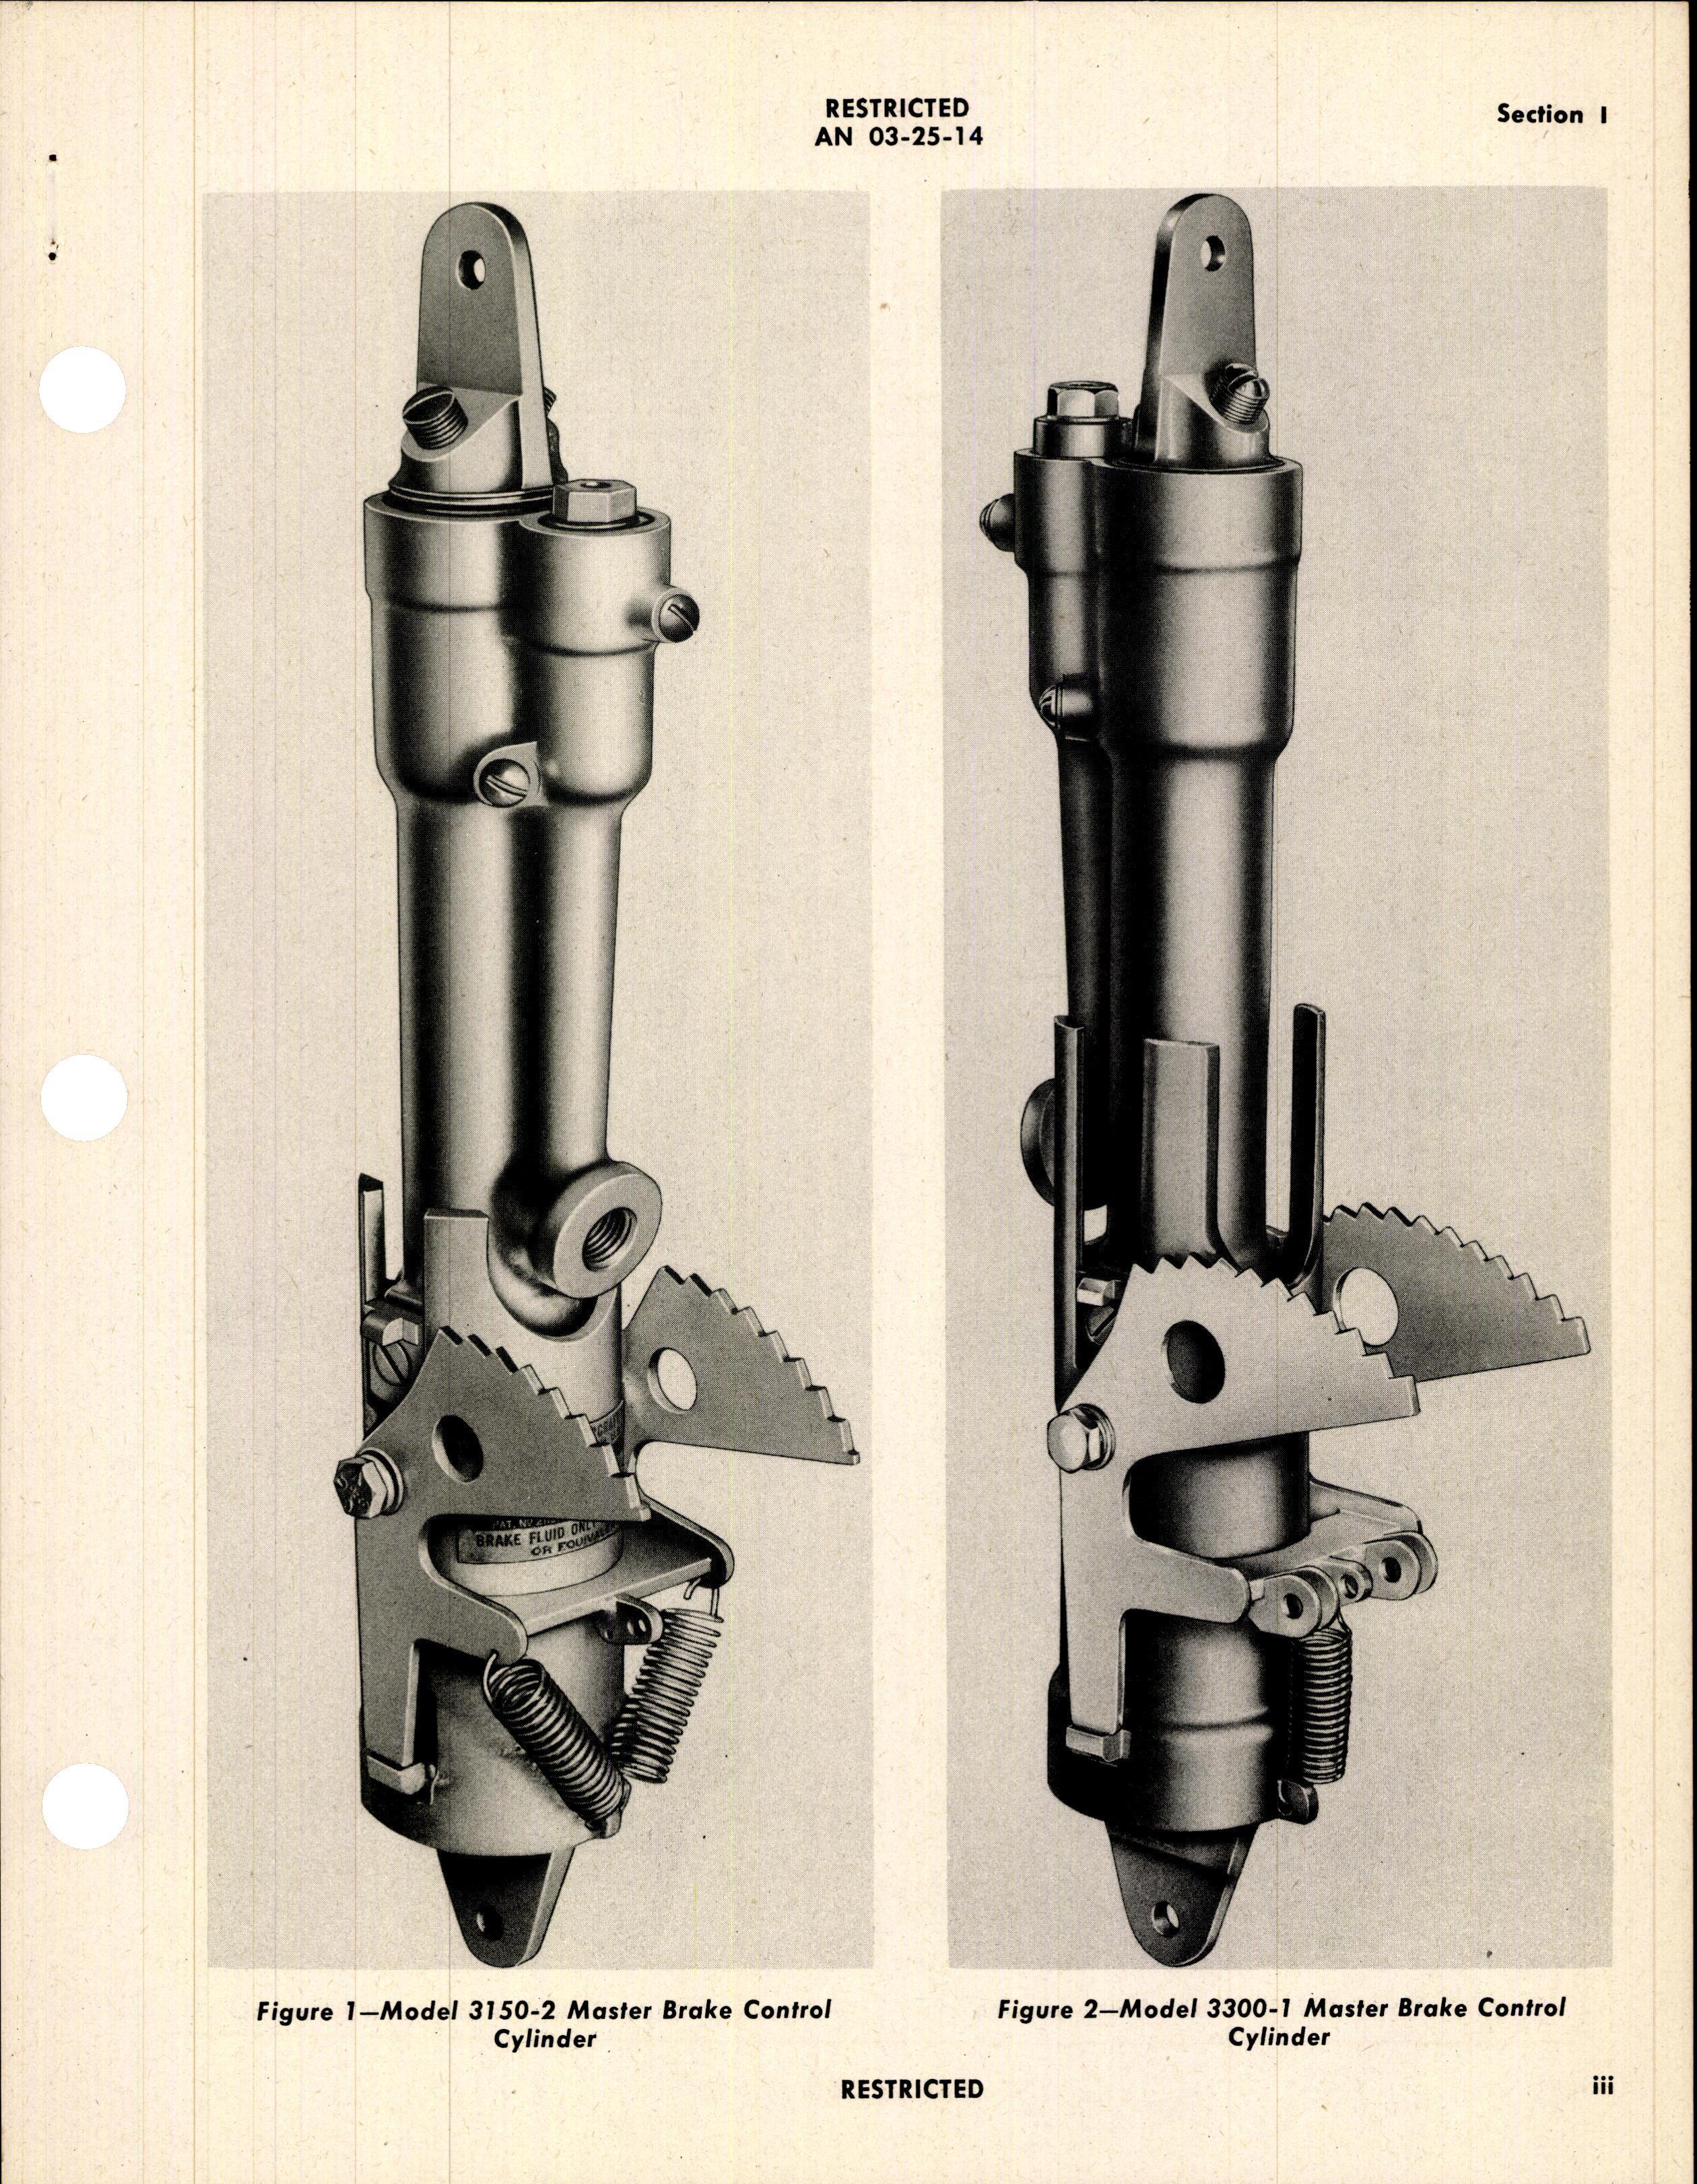 Sample page 5 from AirCorps Library document: Operation, Service, & Overhaul Instructions with Parts Catalog for Master Brake Control Cylinders